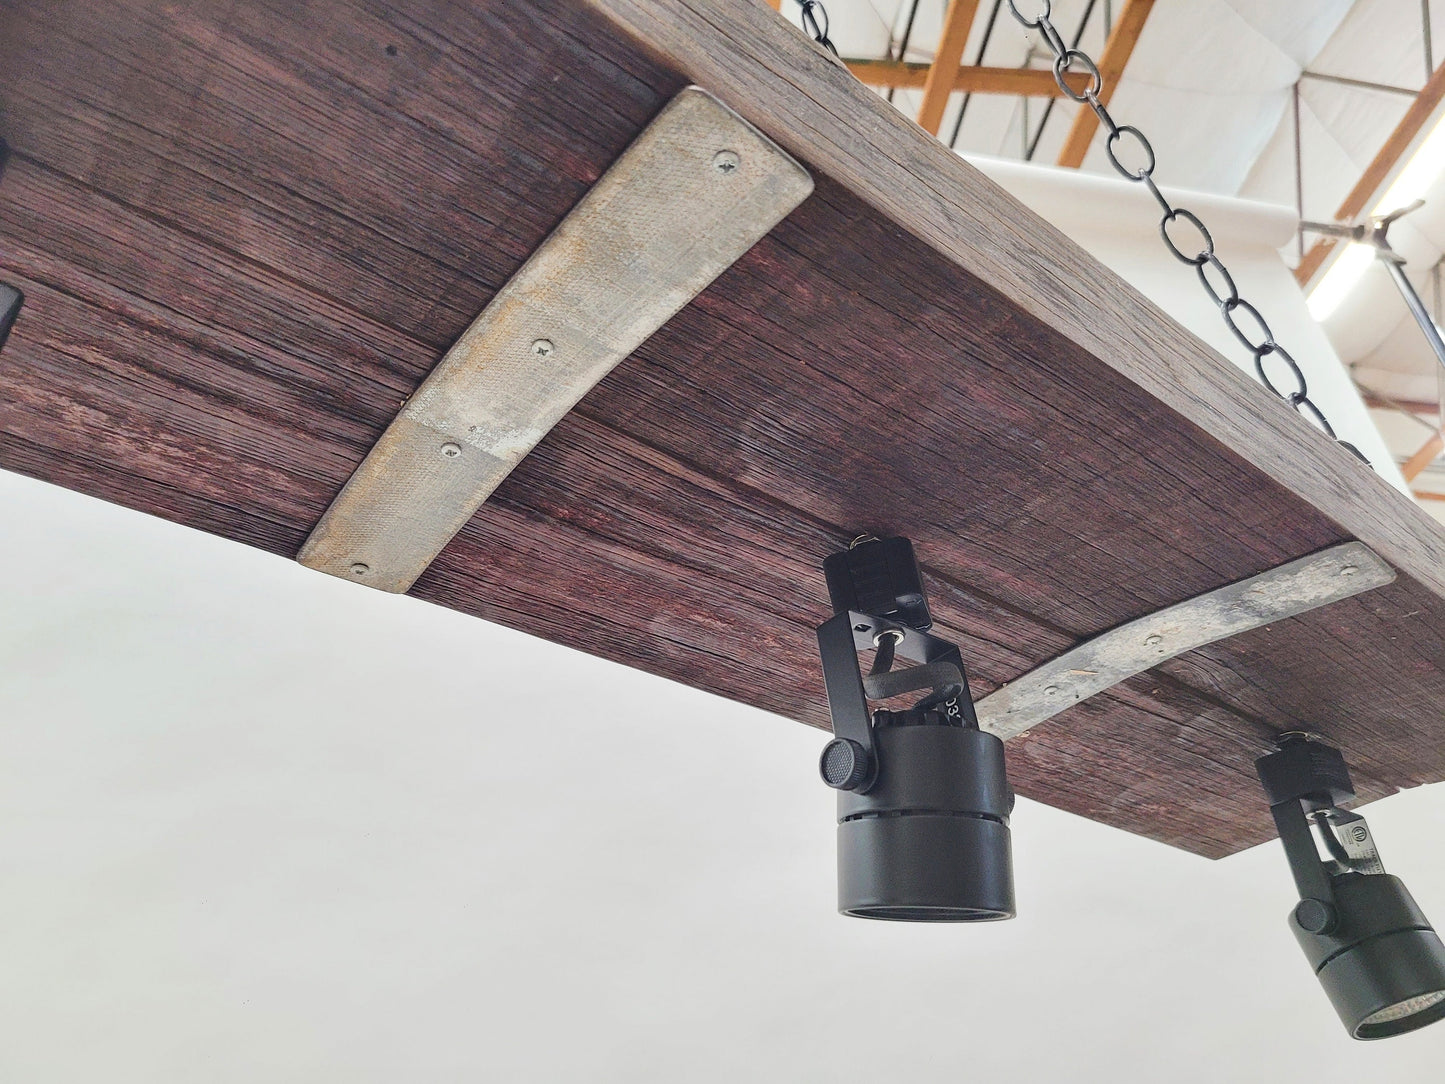 Wine Barrel Chandelier - SEKTI - With Adjustable spotlights Made from Retired New York Wine Barrels + Rings. 100% Recycled!